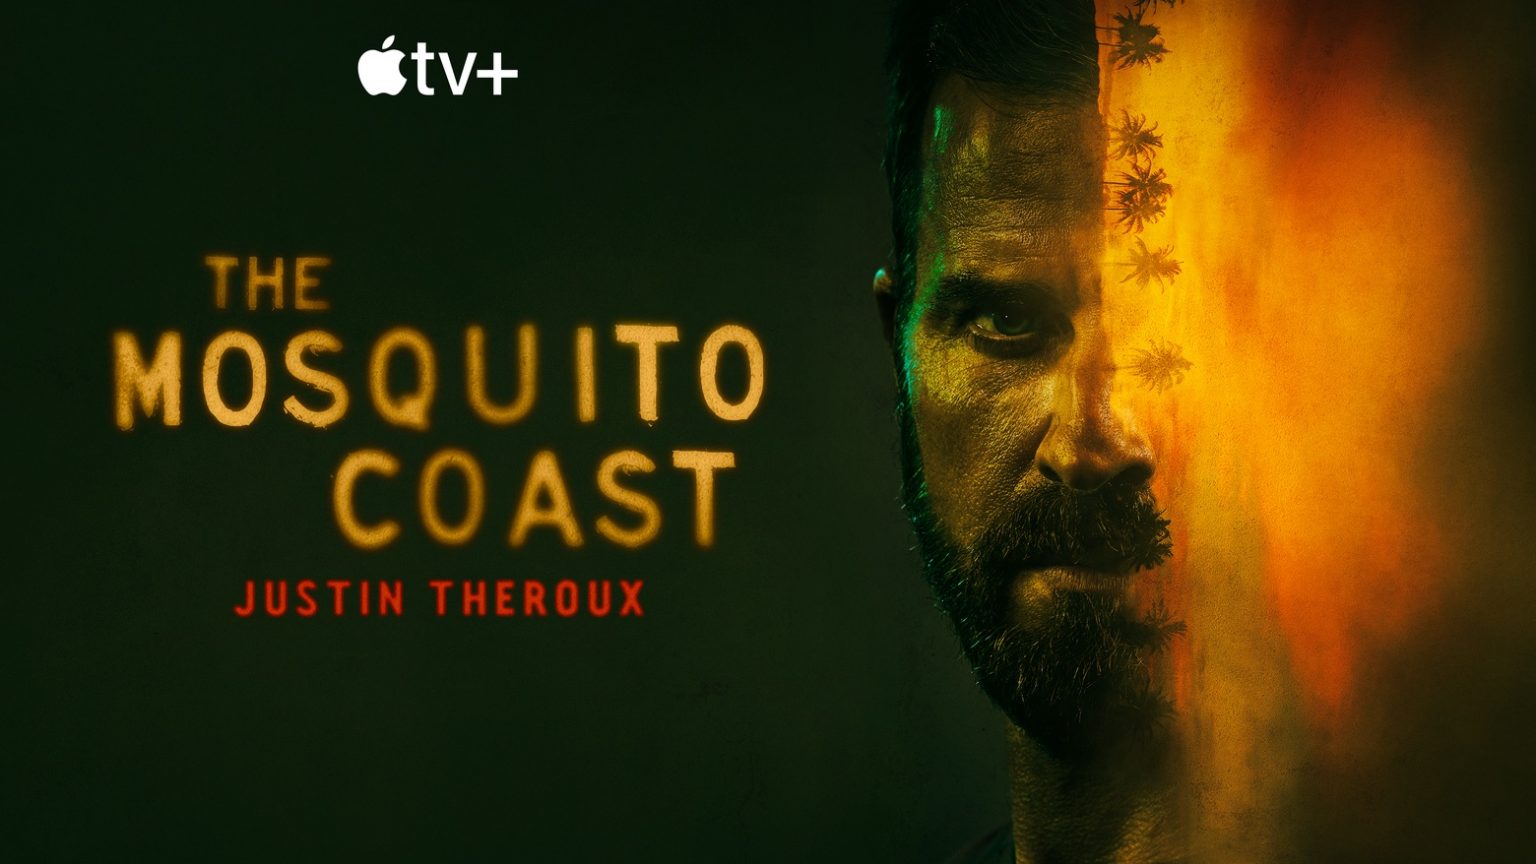 ‘The Mosquito Coast’ will bring more on-the-run adventure to Apple TV+ in season 2